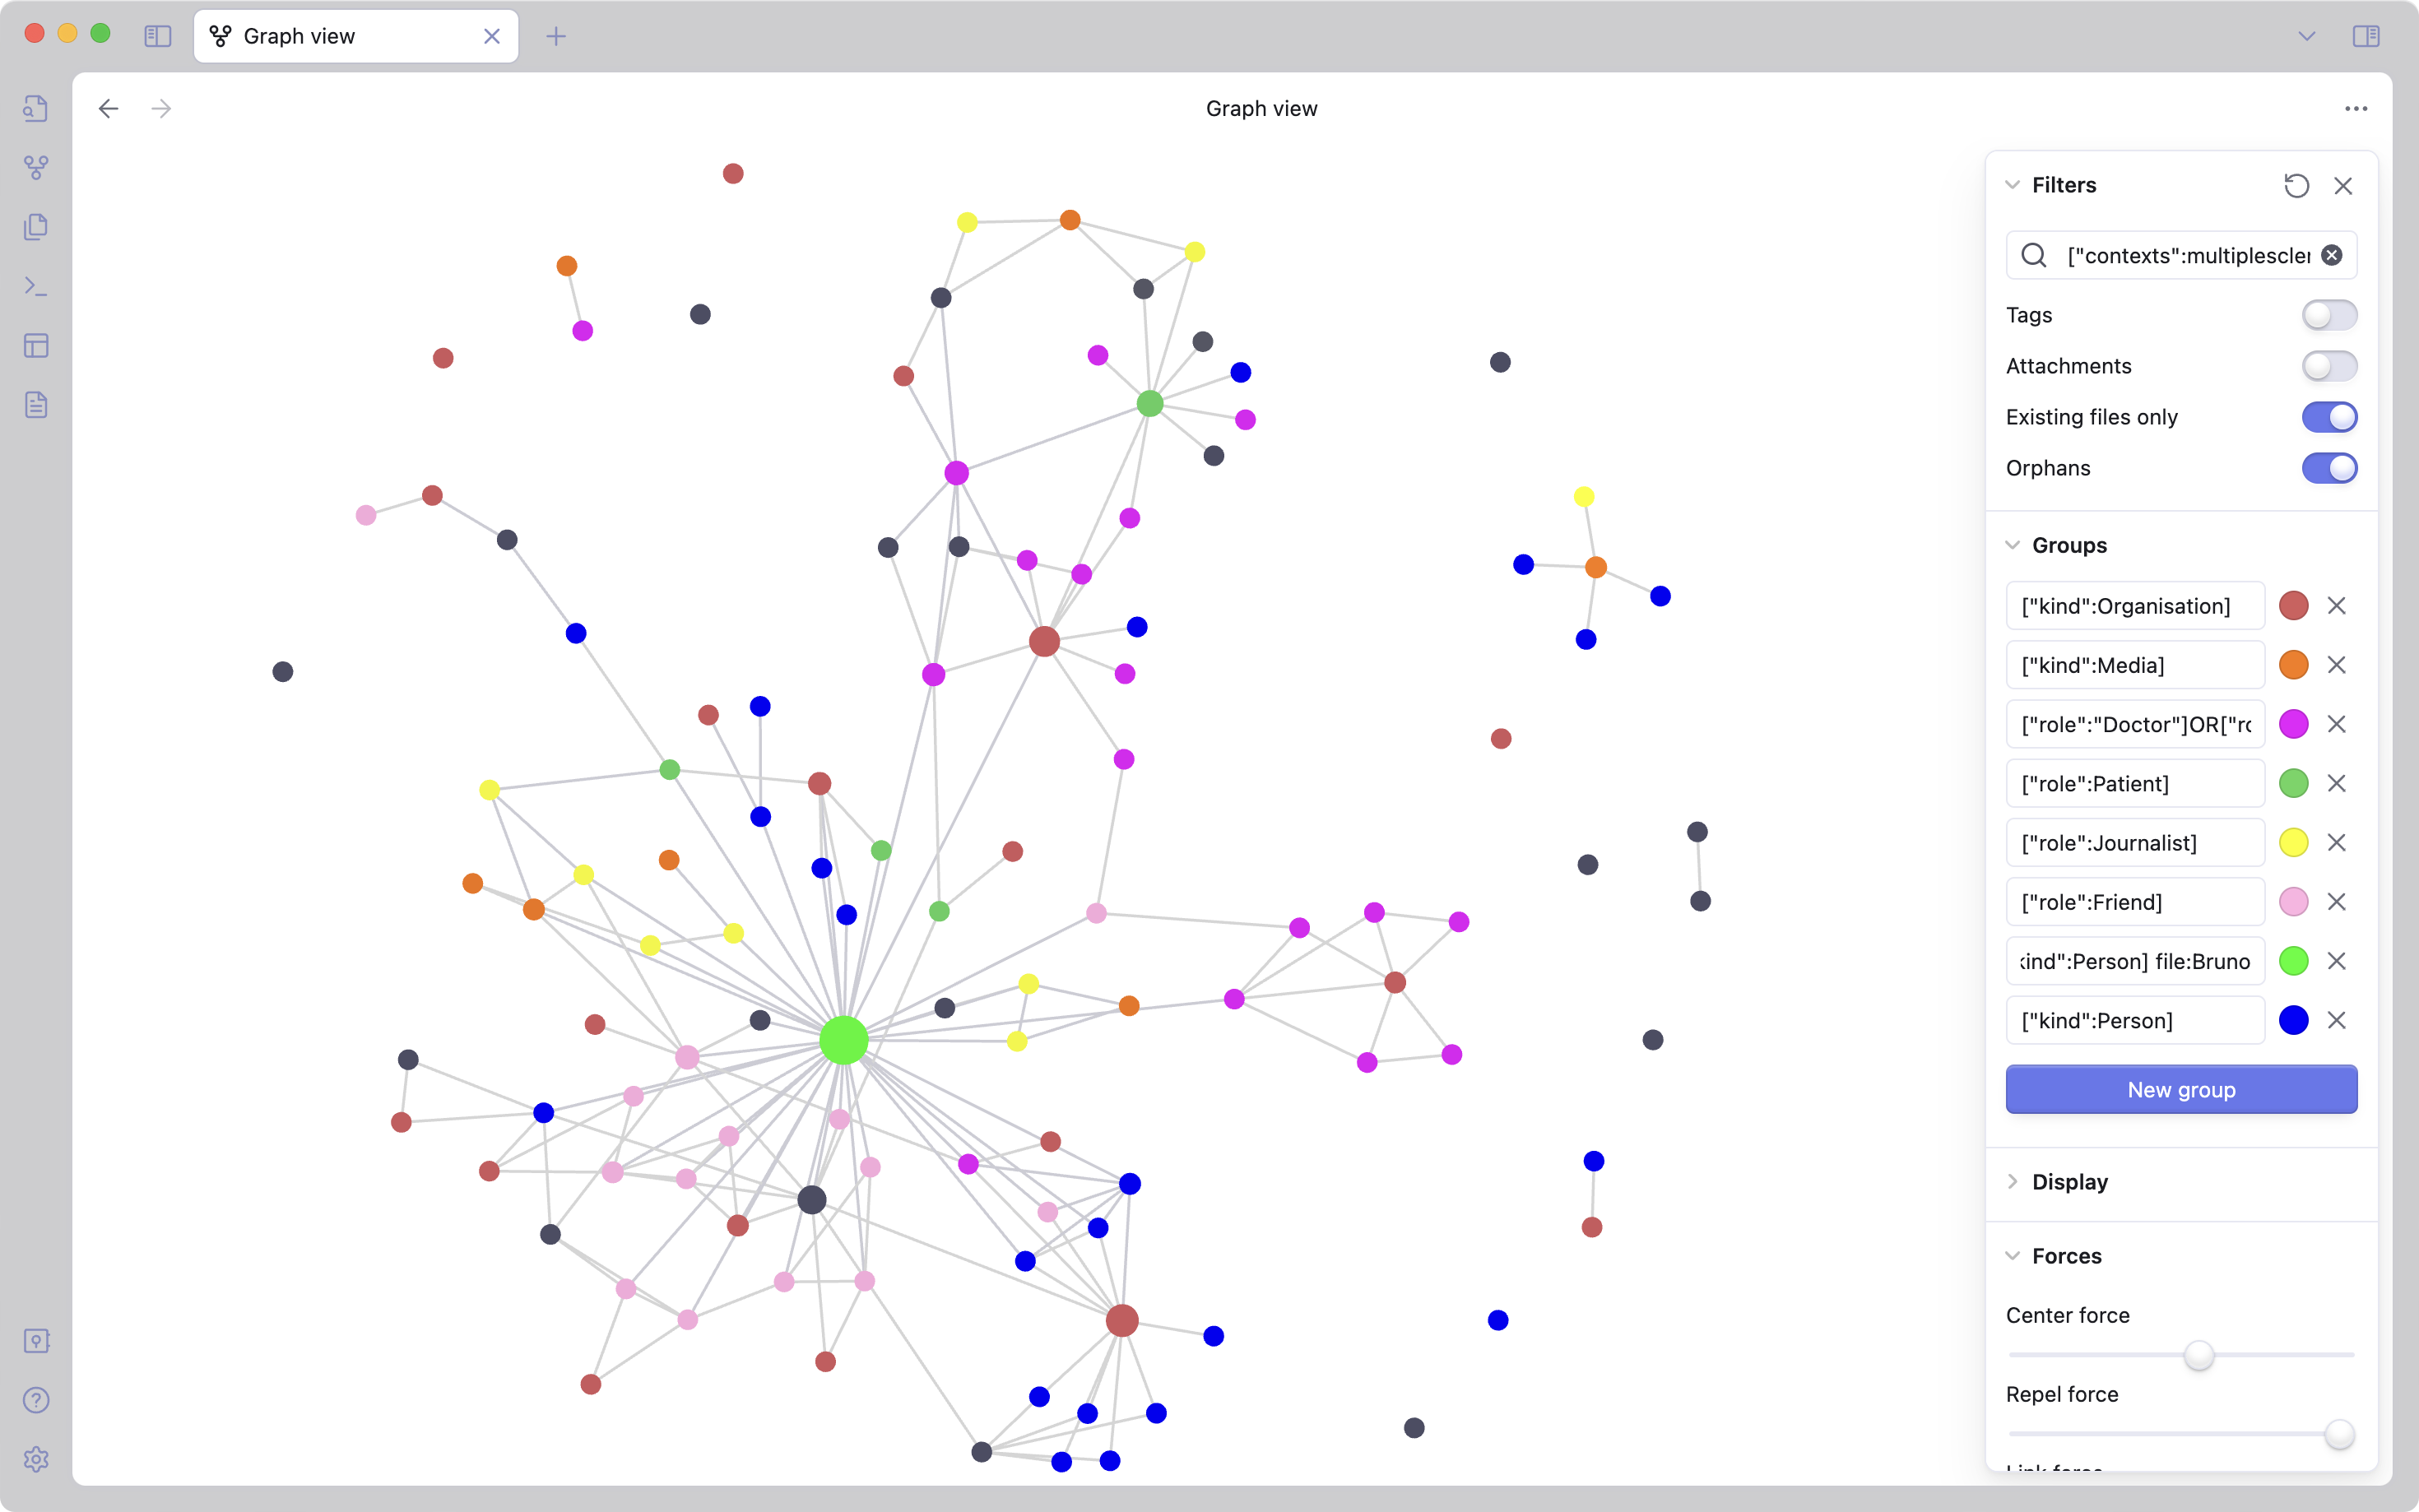 graph view of notes refering to various stakeholders as a way to show their social network